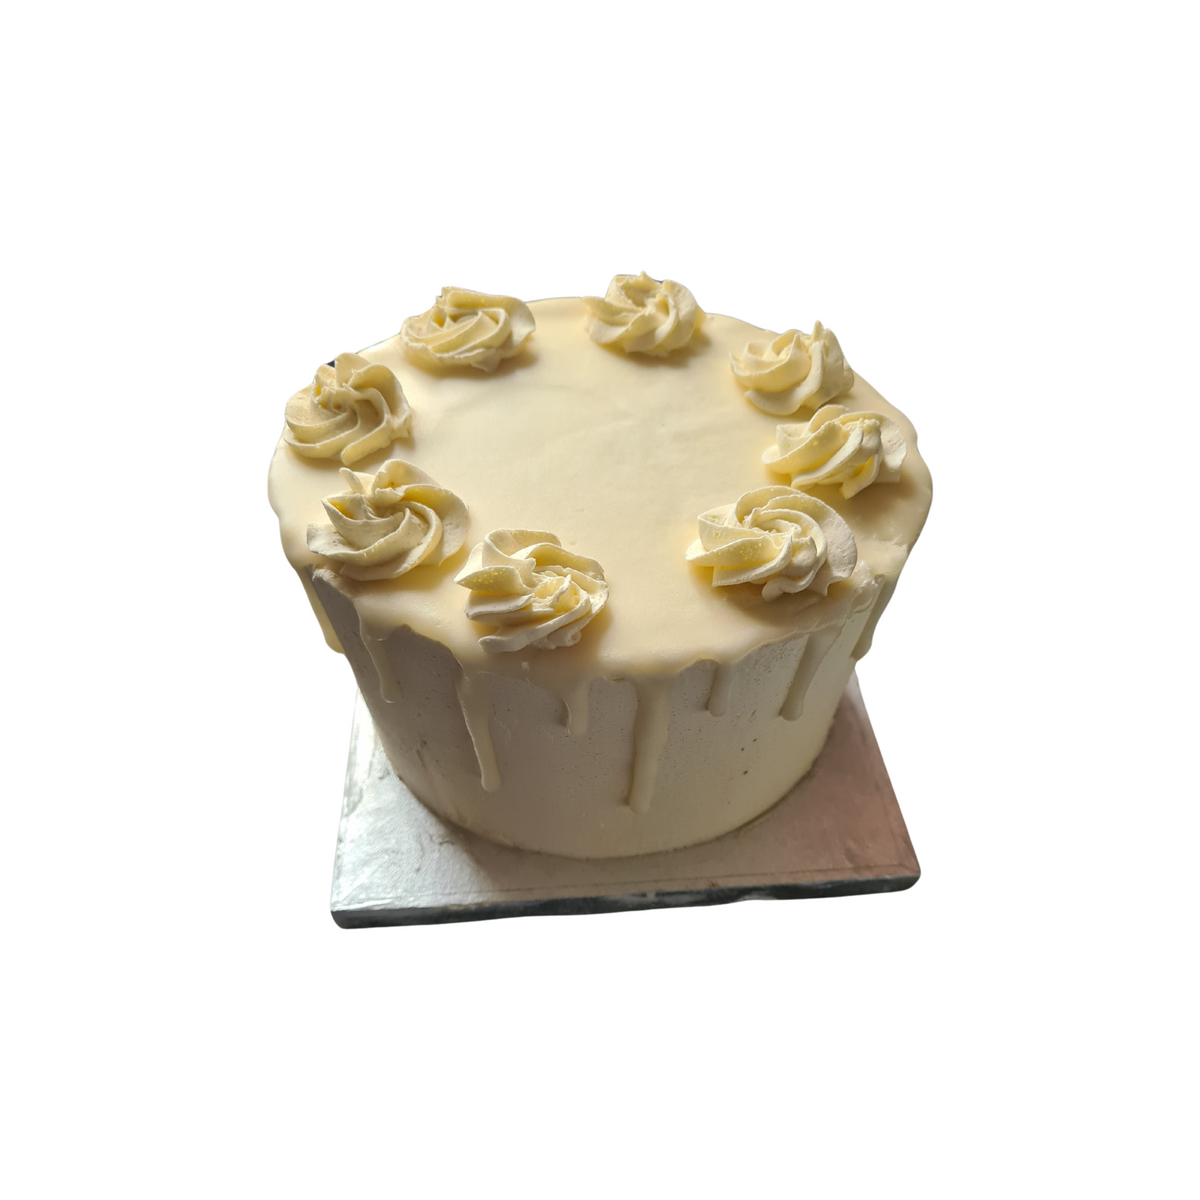 A white frosted, diabetic-friendly Vanilla Keto Birthday Cake with decorative piping on a silver base, isolated on a white background from No Guilt Bakes.